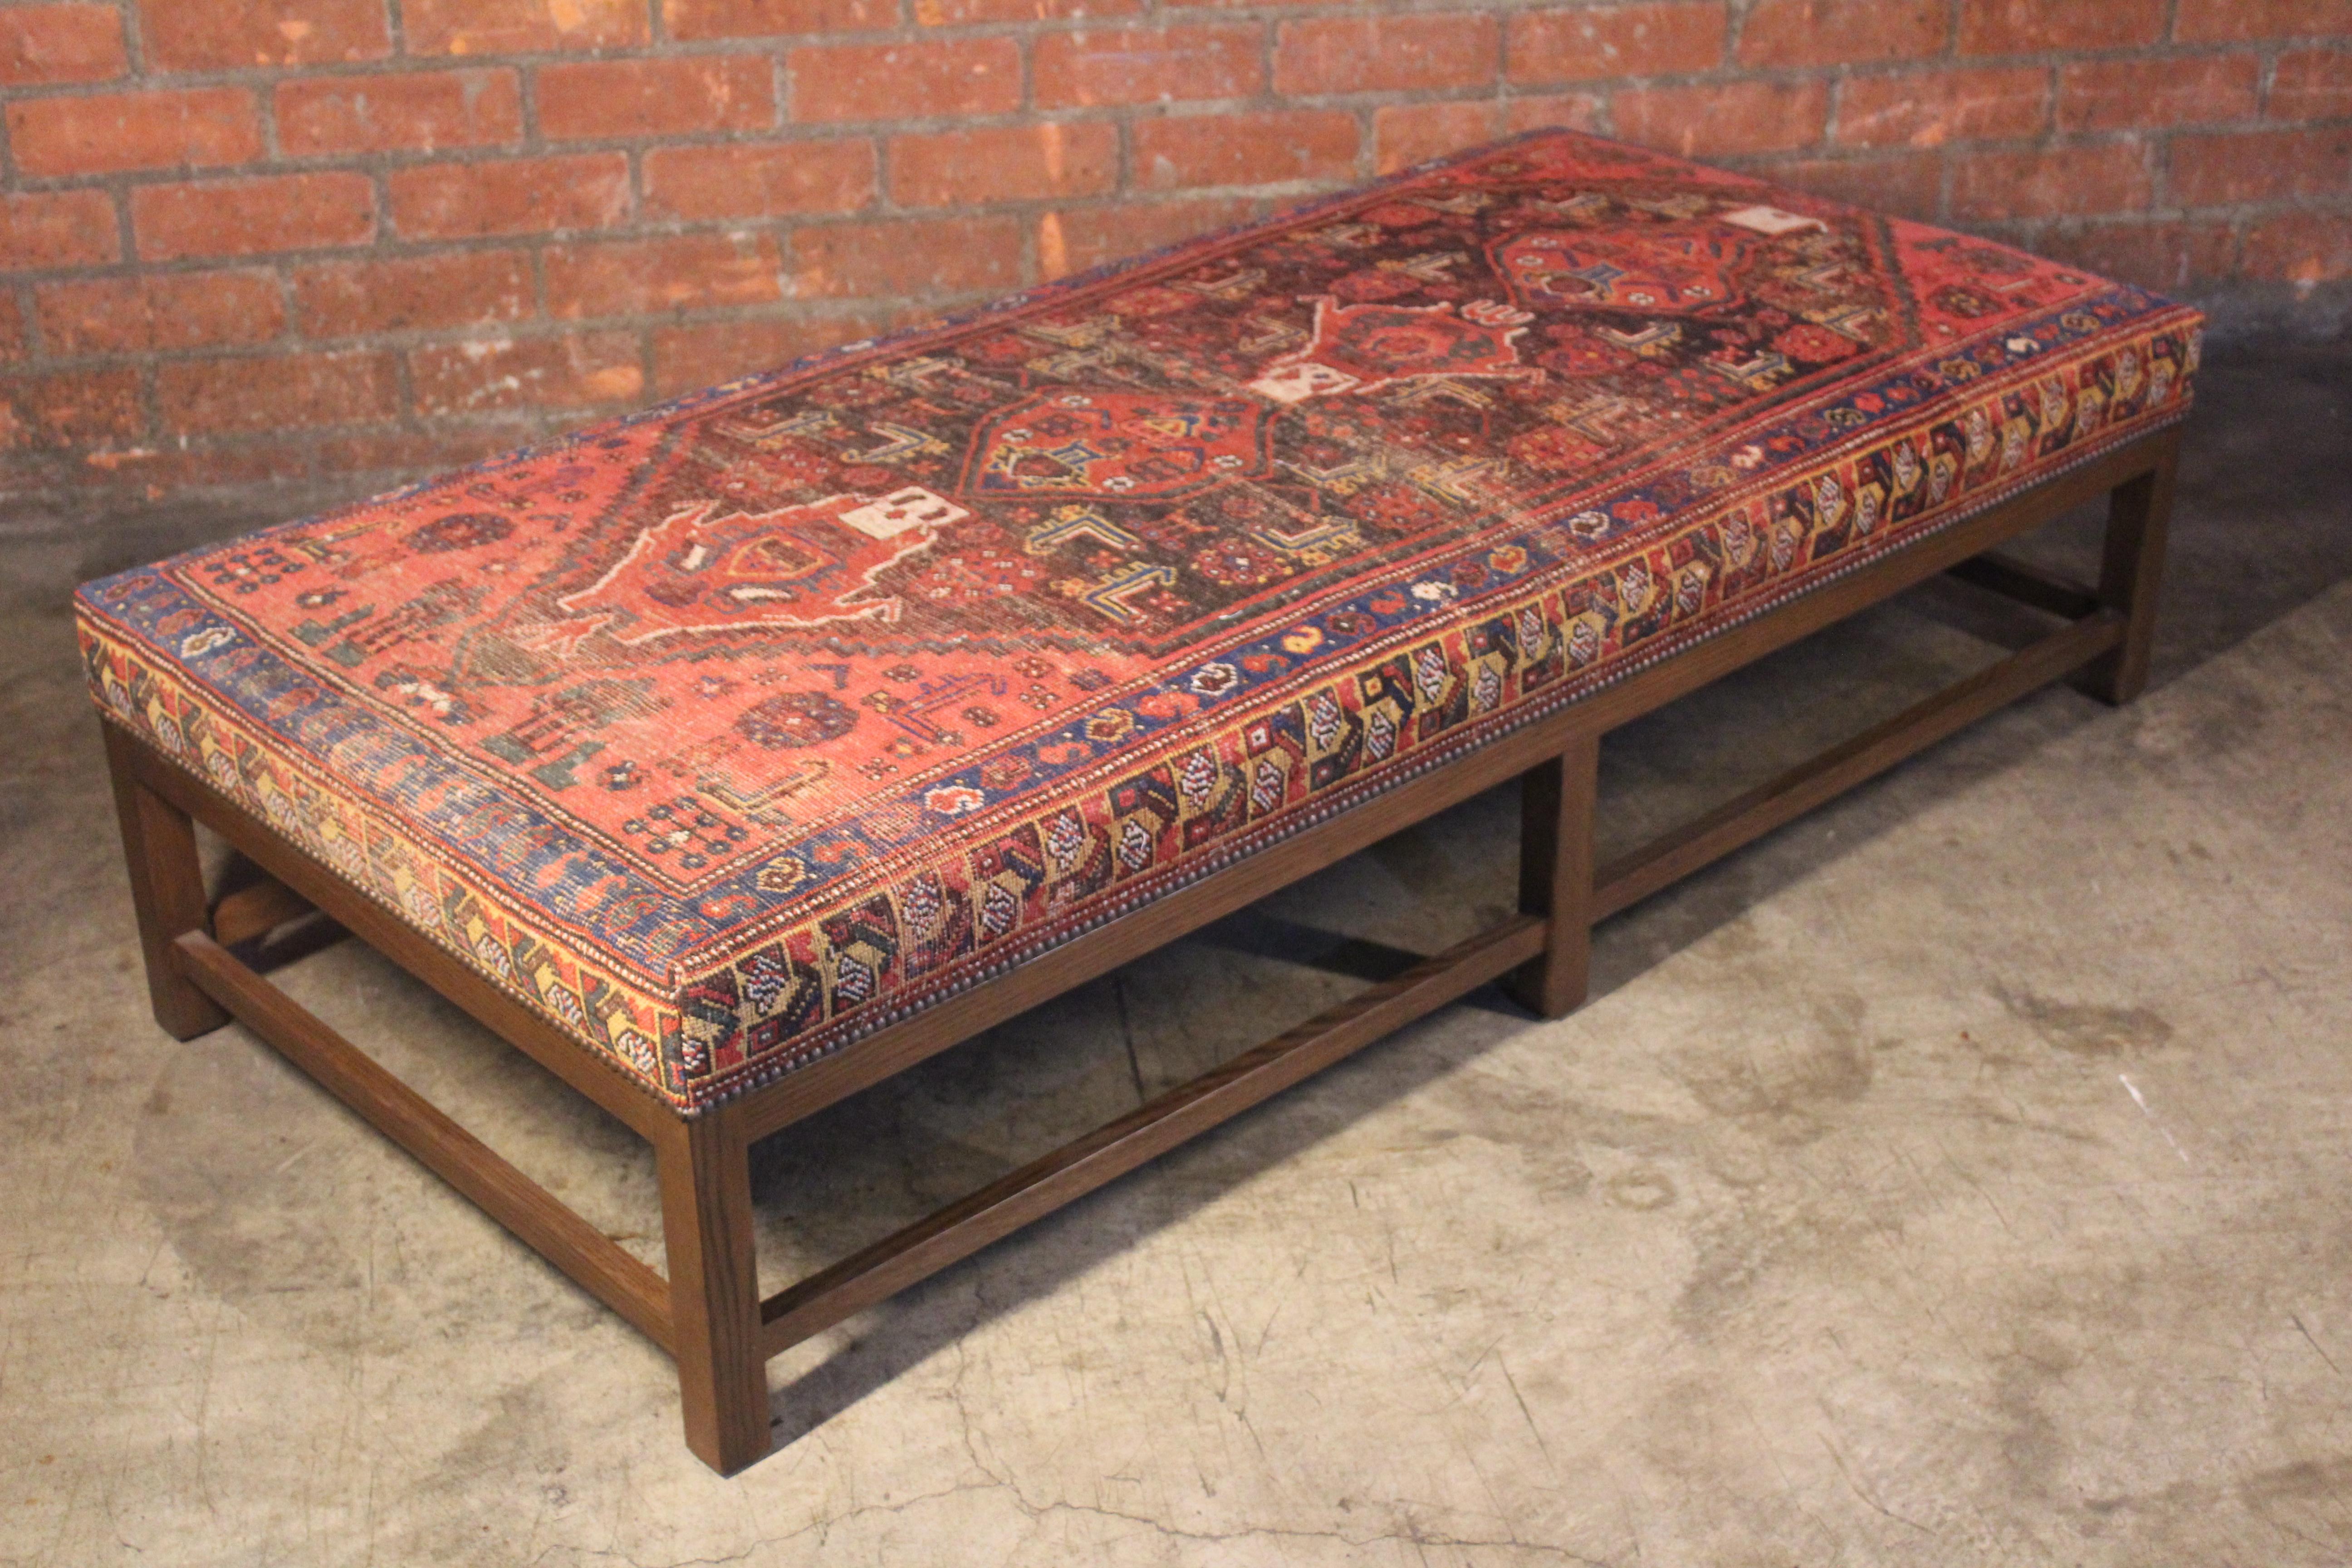 Contemporary Lexington Ottoman Upholstered in a Vintage Turkish Rug